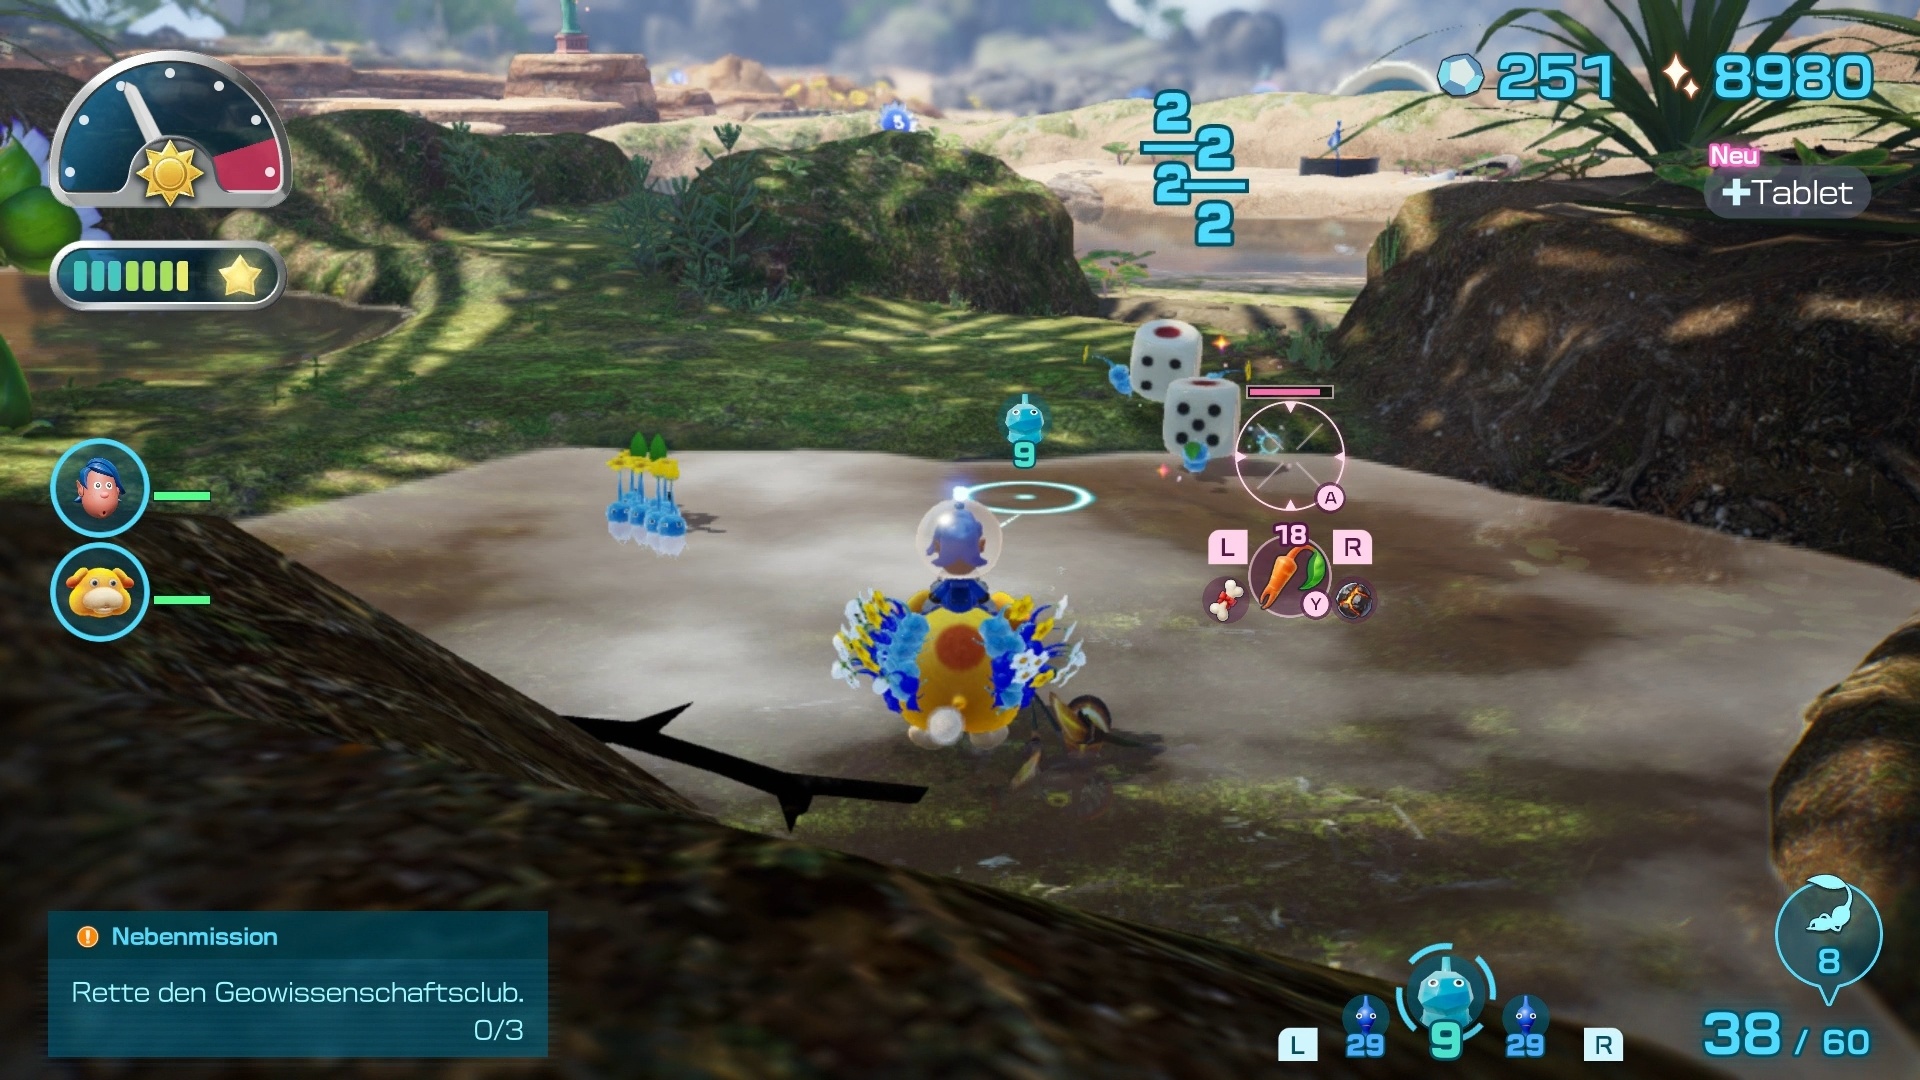 (Light blue Pikmin (left) also freeze waters. The crosshairs in the middle are from our co-op player, who speeds up transport by shooting the cube treasures)